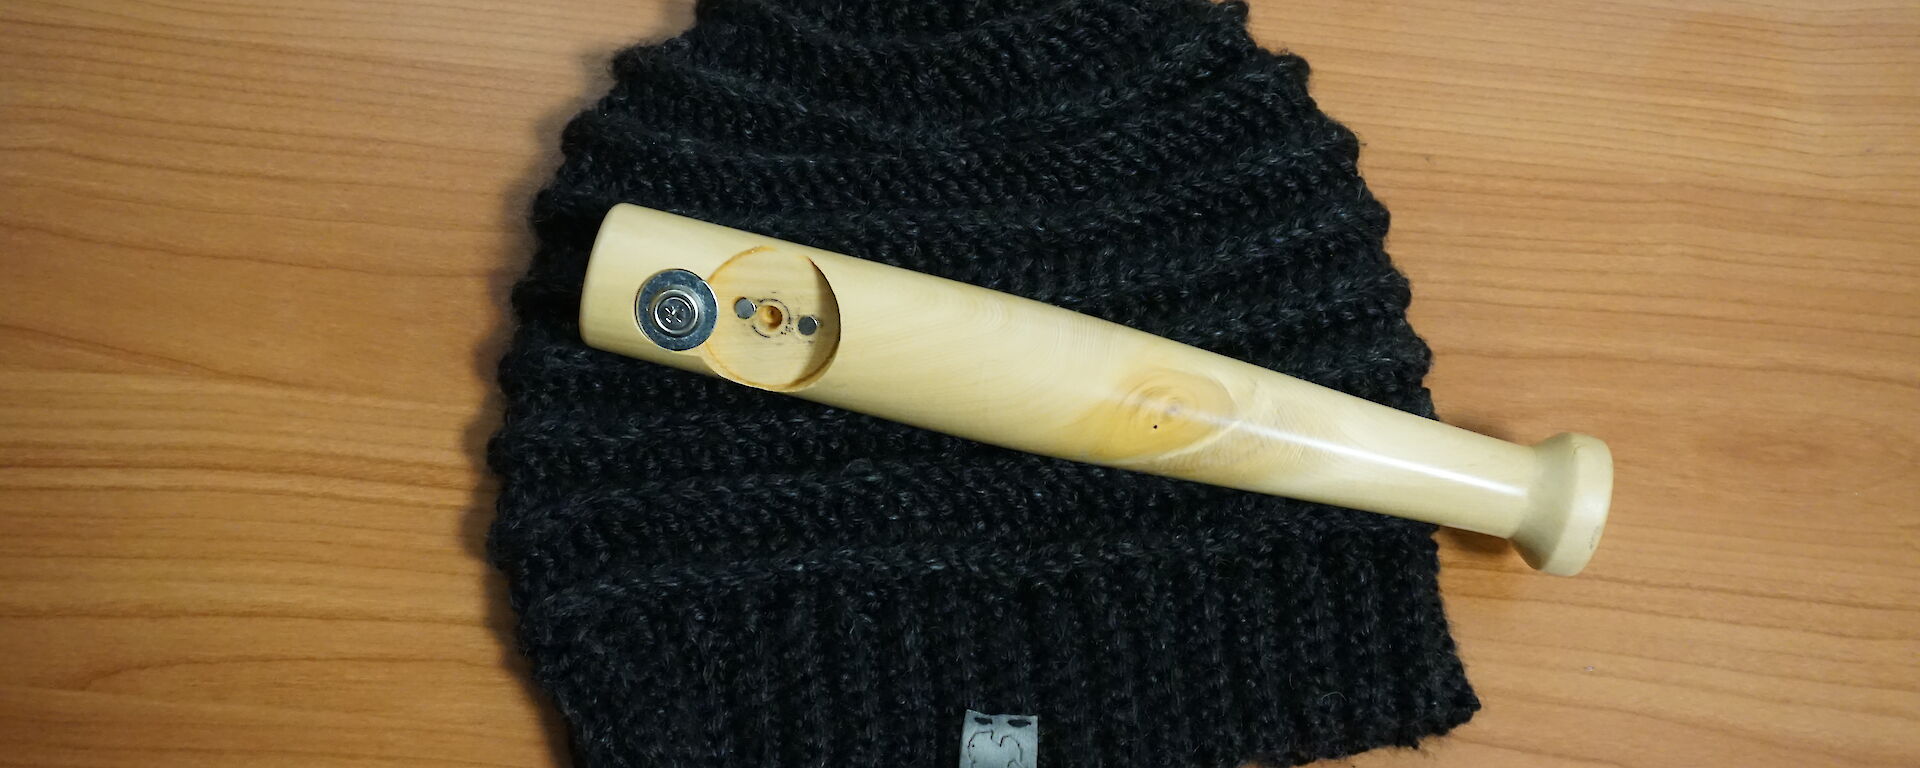 A locally knitted beanie and bottle opener made for an expeditioners birthday at Casey